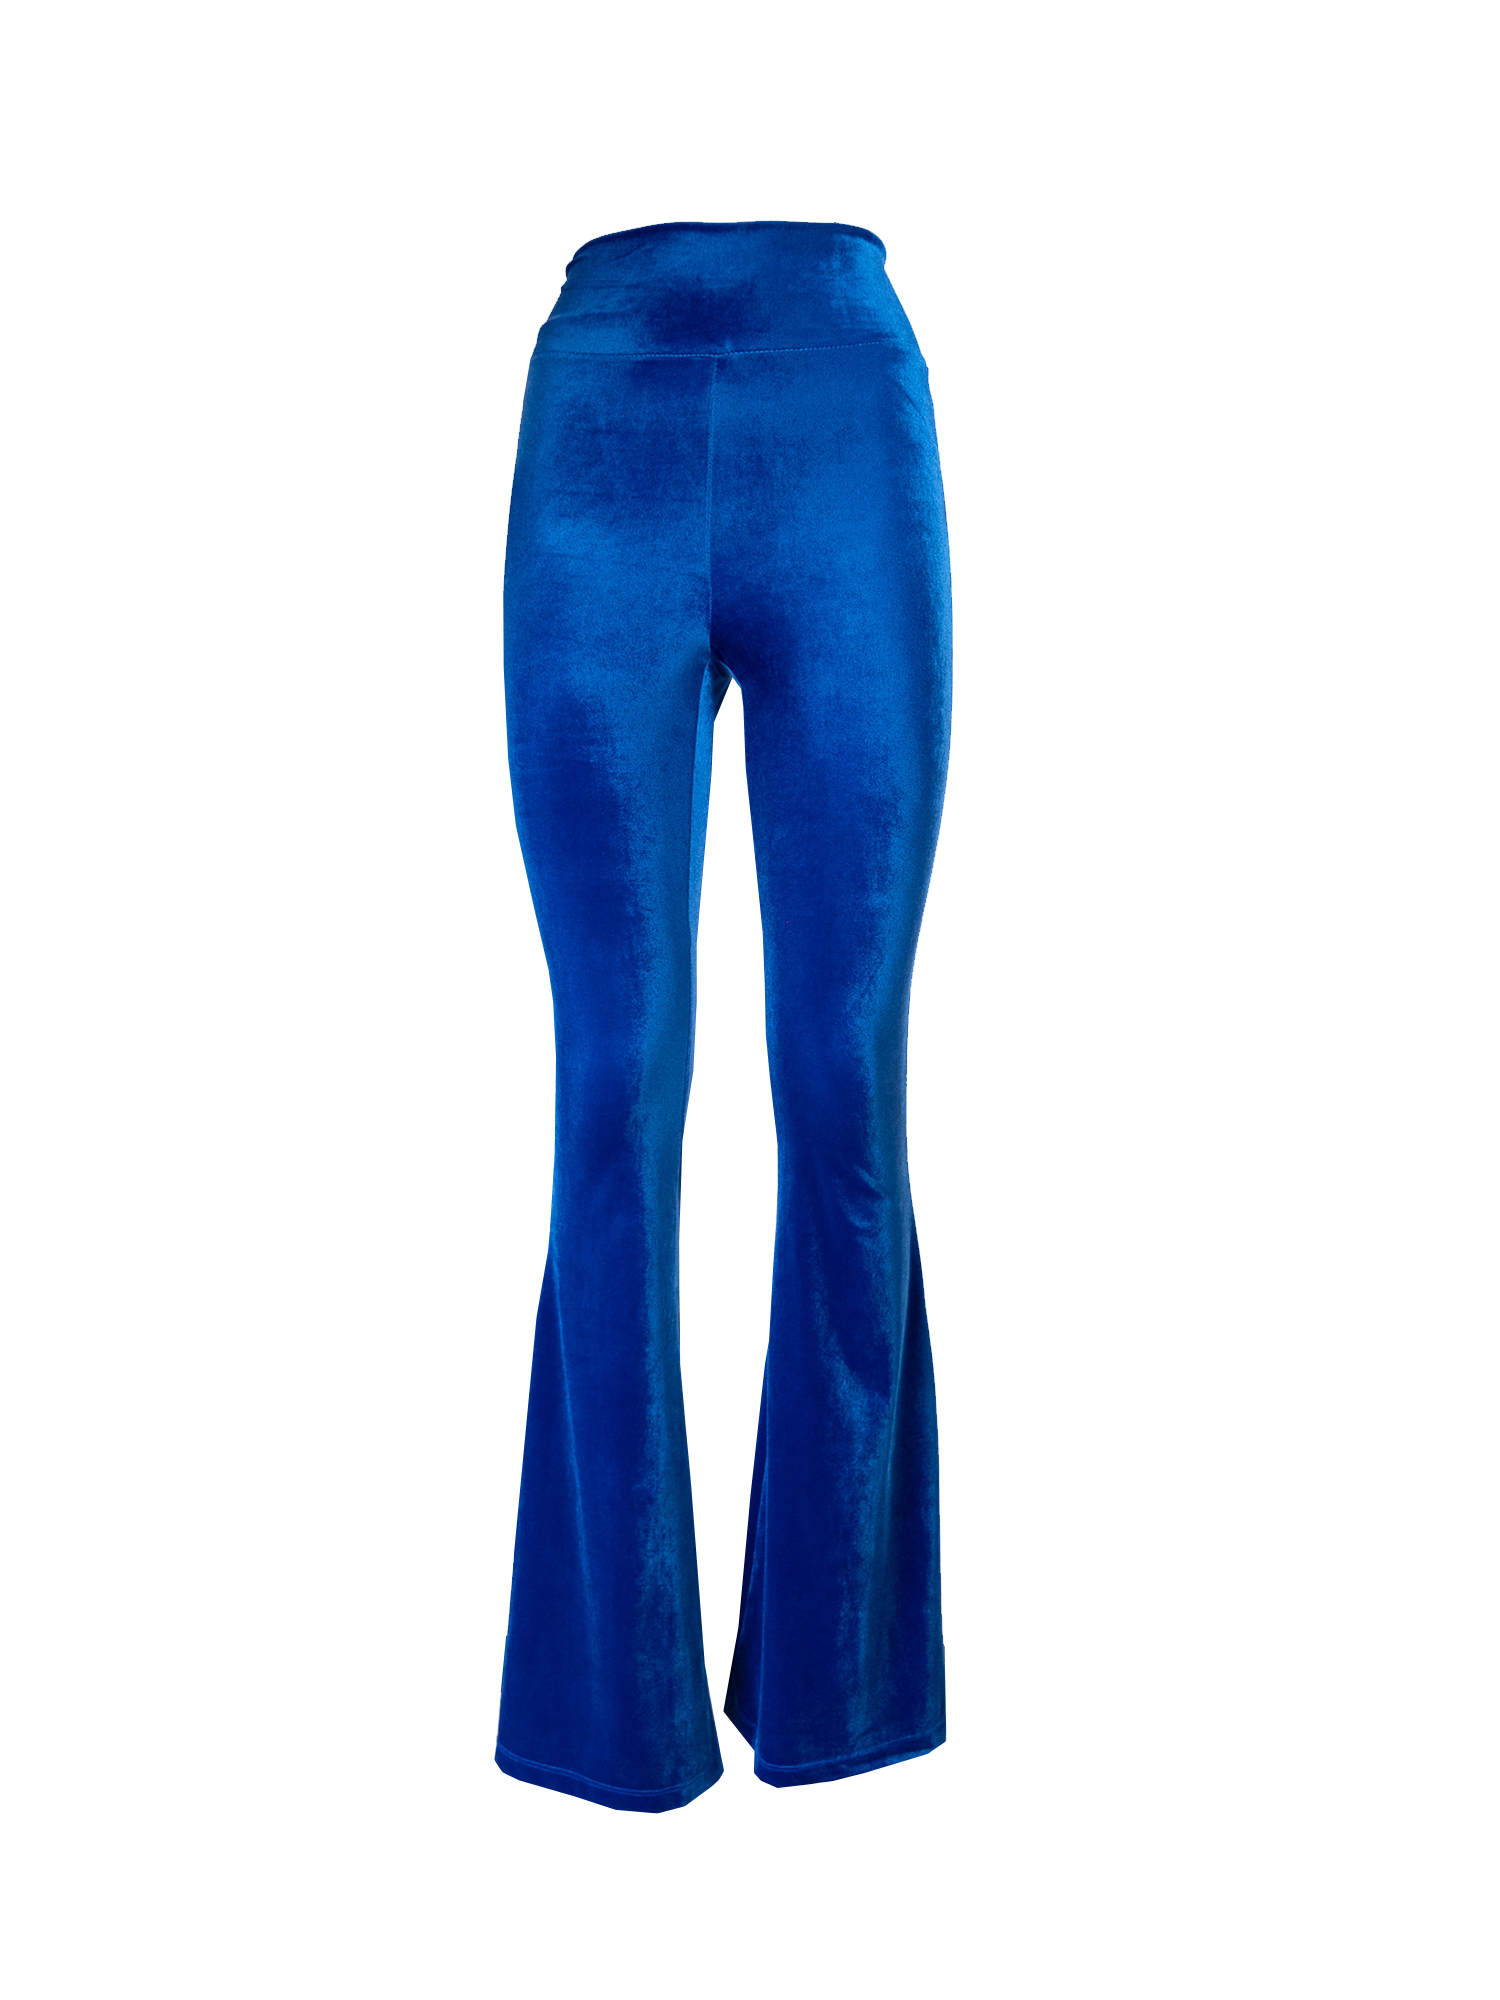 LOLA - flared trouser with high waist in bluette chenille